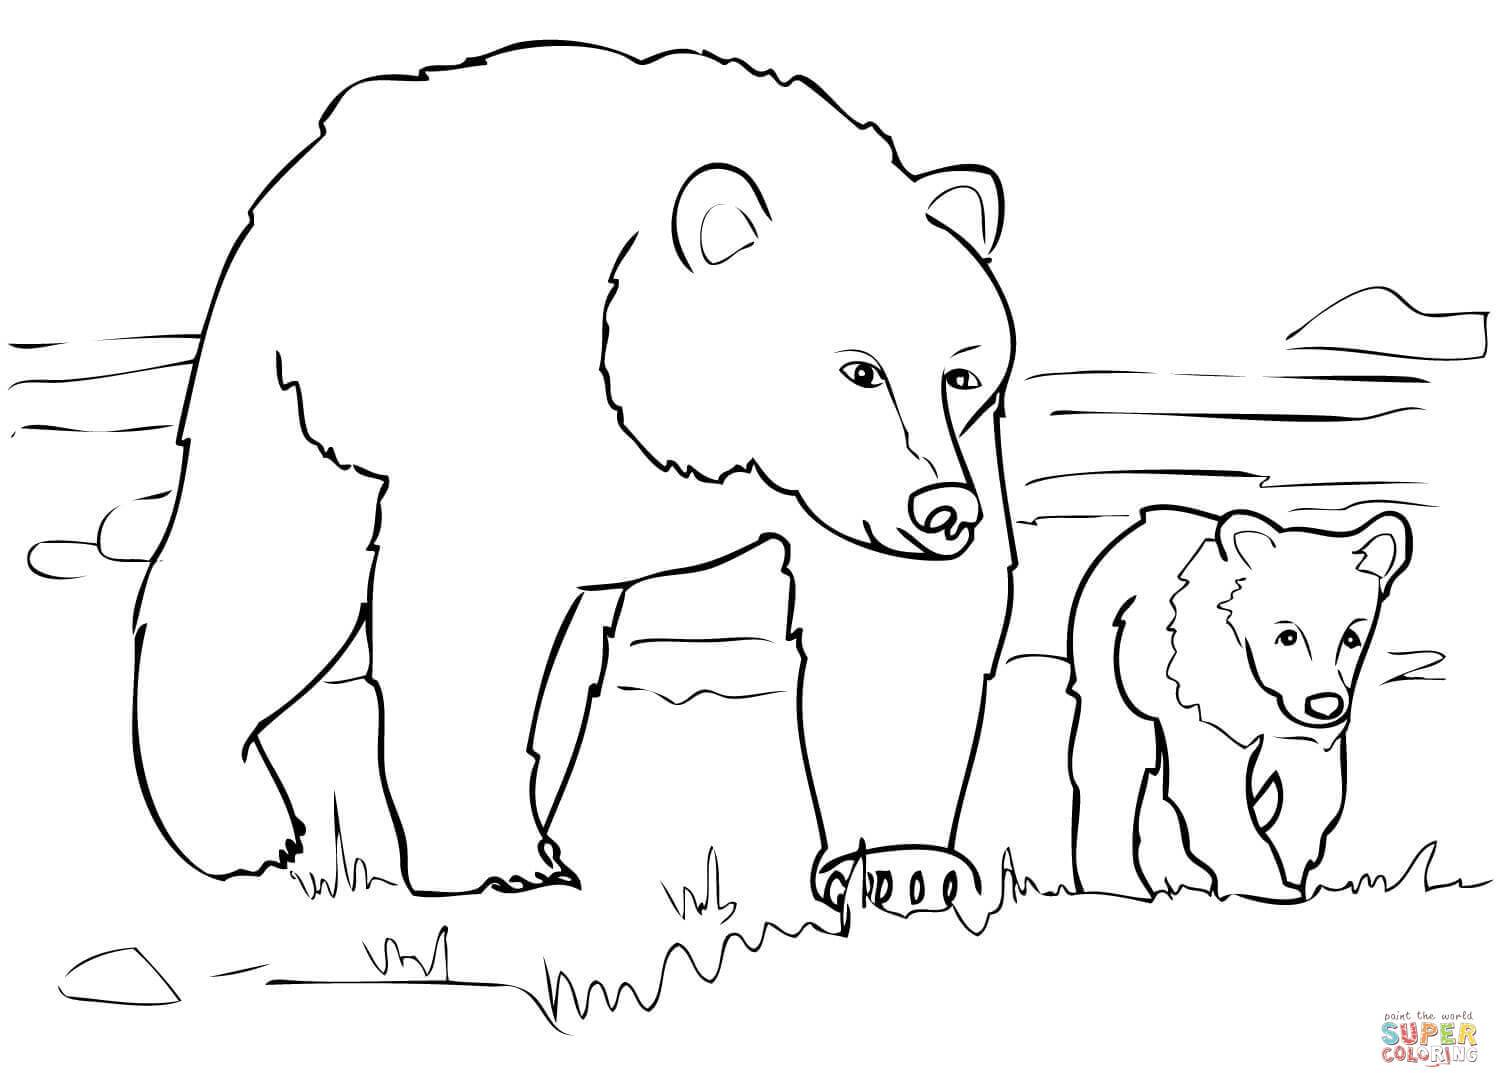 Coloring Pages Of Black Bears Coloring Pages Of Black Bears Colouring